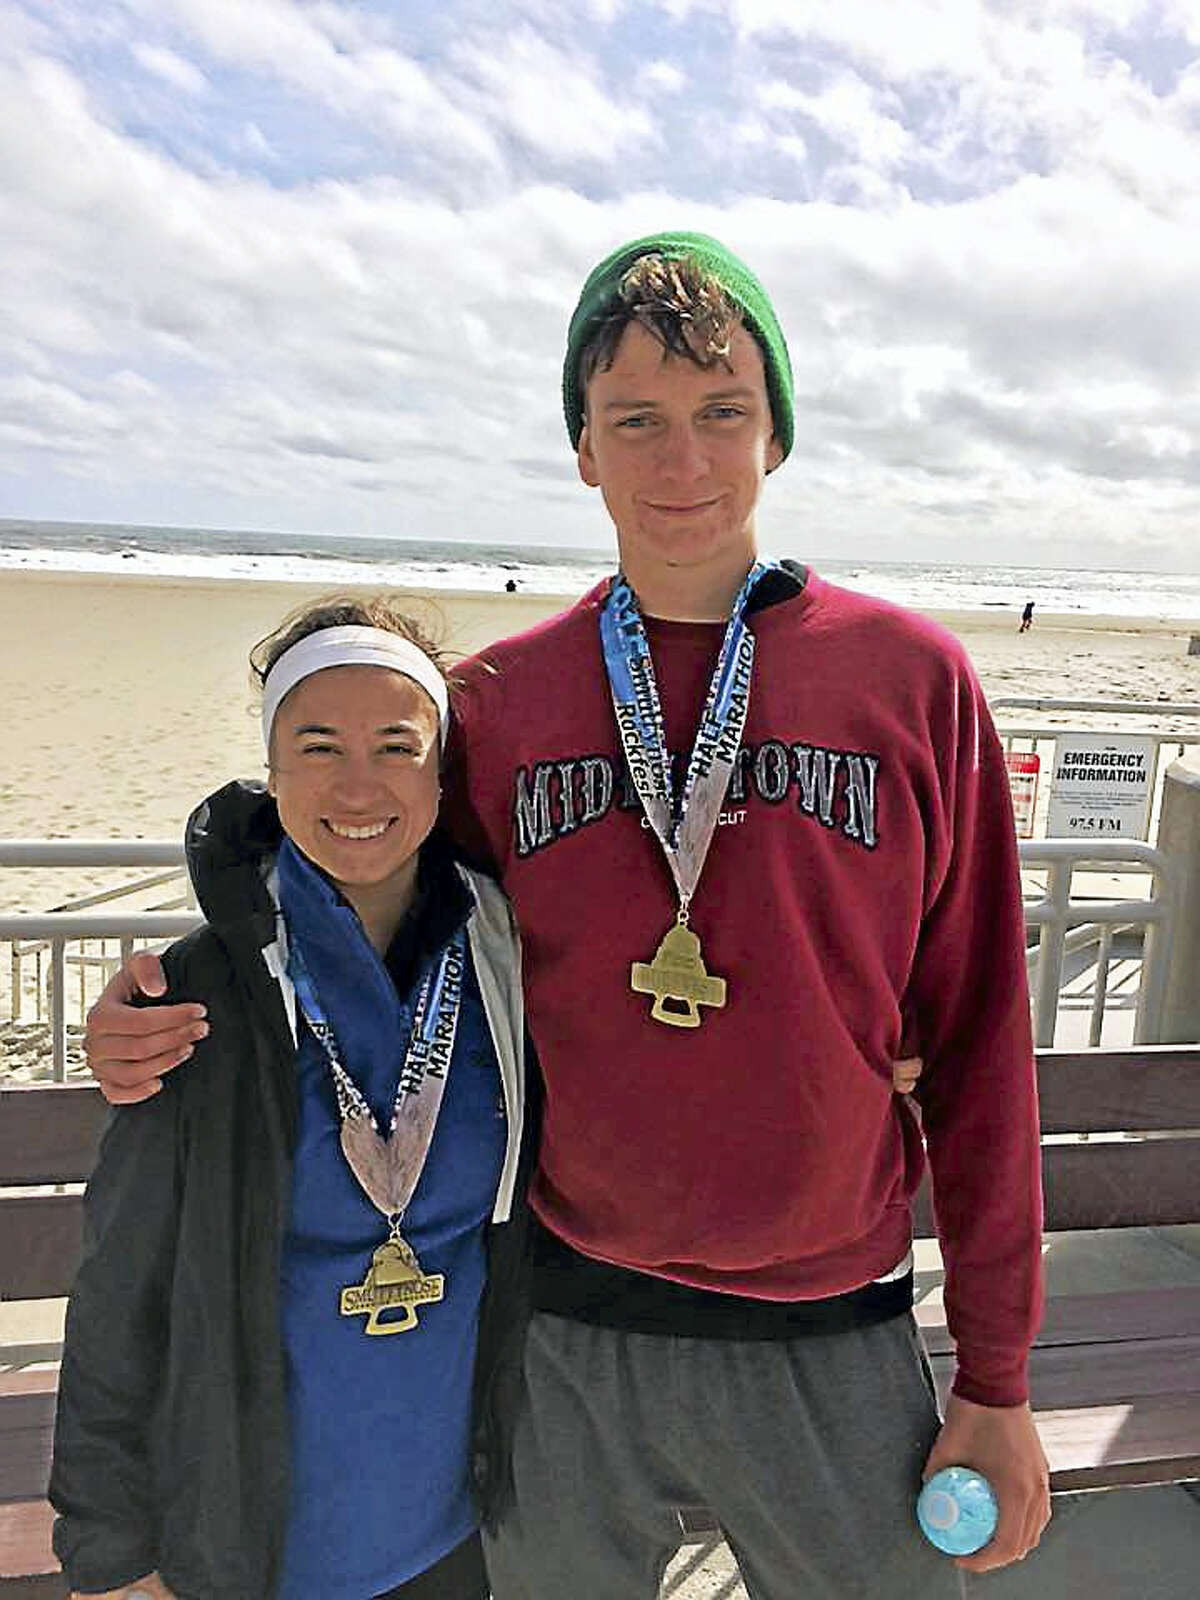 Middletown native Mark Adamiak is running the Boston Marathon in April to raise money for Playworks, a nonprofit that improves school climates, reduces bullying and increases student engagement through the power of play. He is shown with his girlfriend Lisa Giorgetti, left, after the Smuttynose Rockfest Marathon in Hampton Beach, New Hampshire, in October 2015.